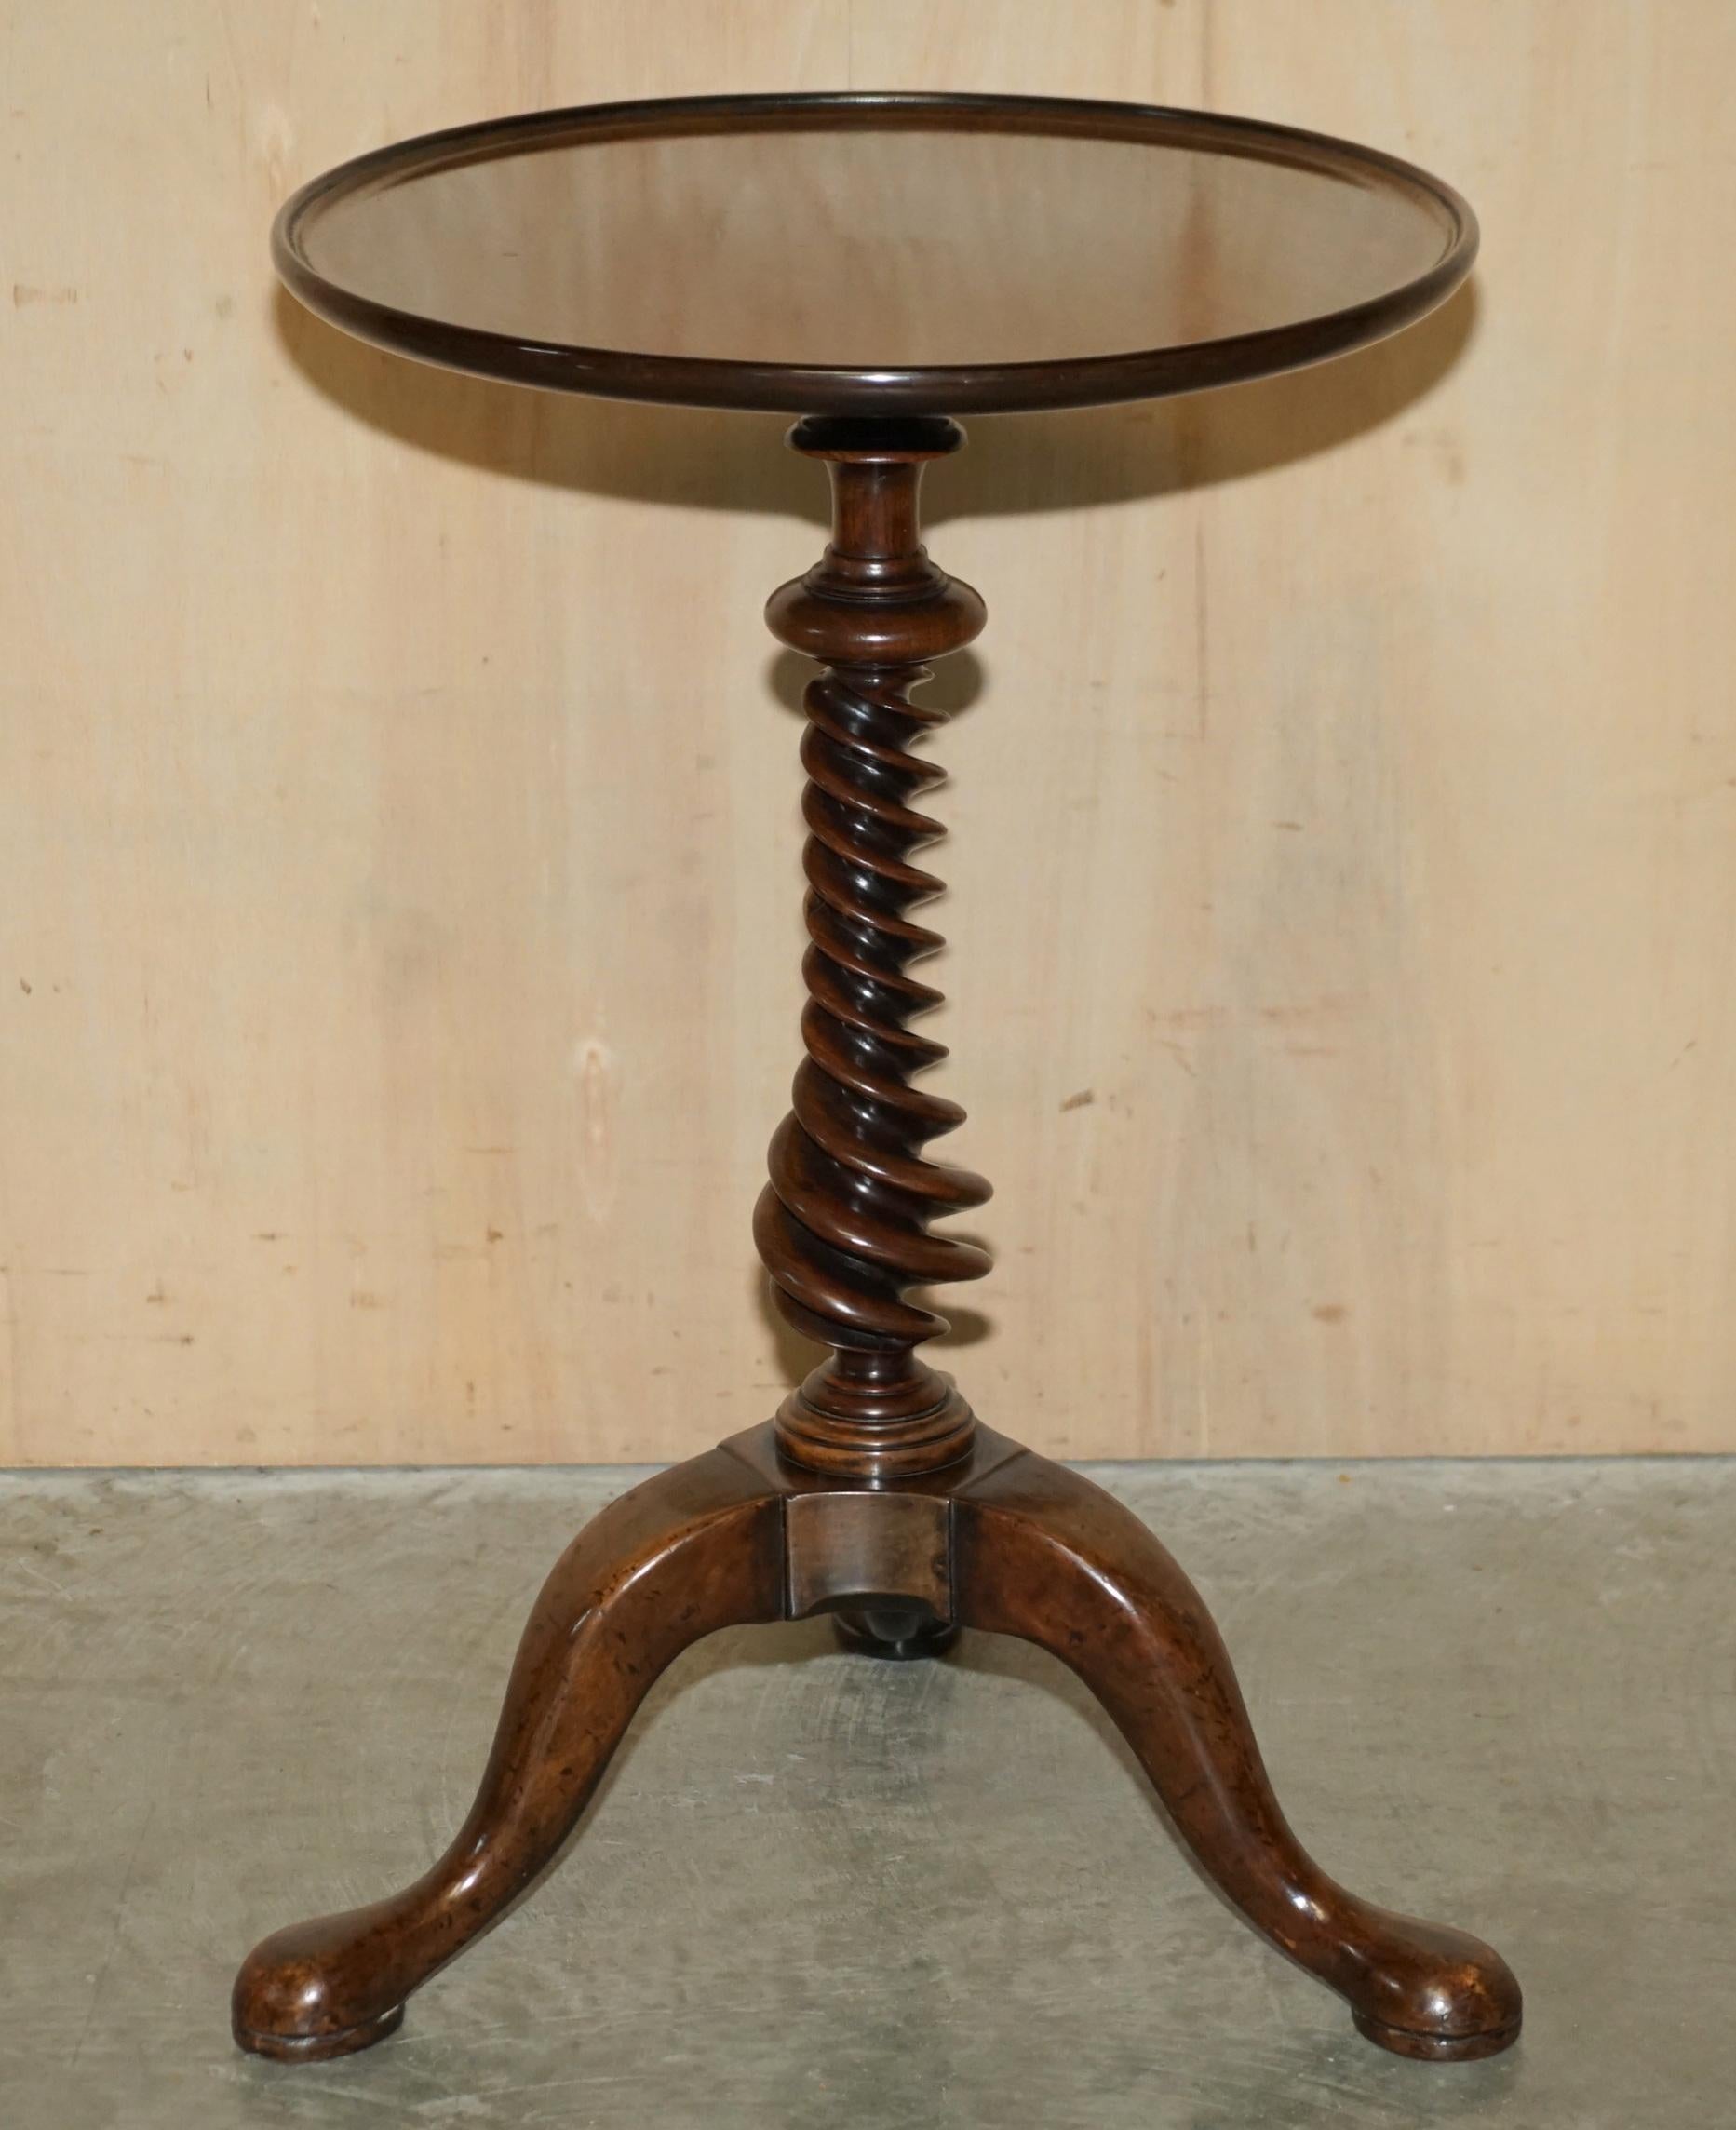 Exquisite Antique George III circa 1800 Hardwood Side Table with Spiral Column For Sale 6